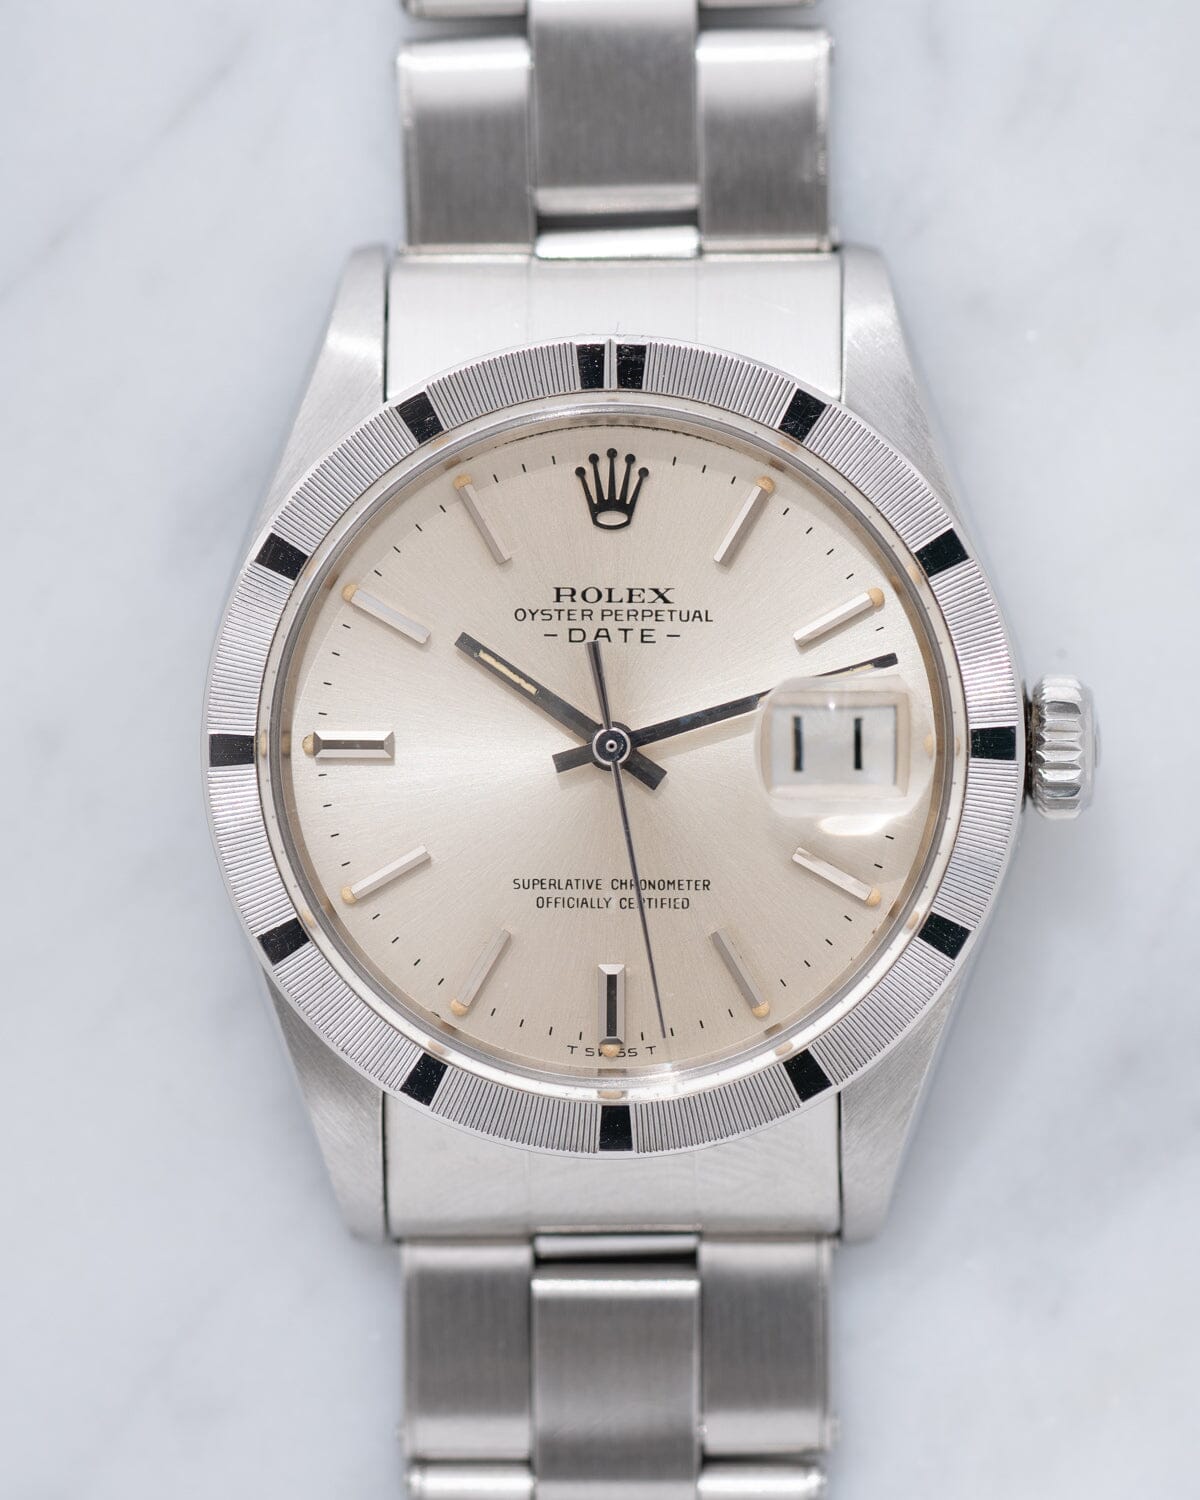 Rolex Oyster Perpetual Date 1501 Silver Dial with Riveted Bracelet Watch ROLEX 